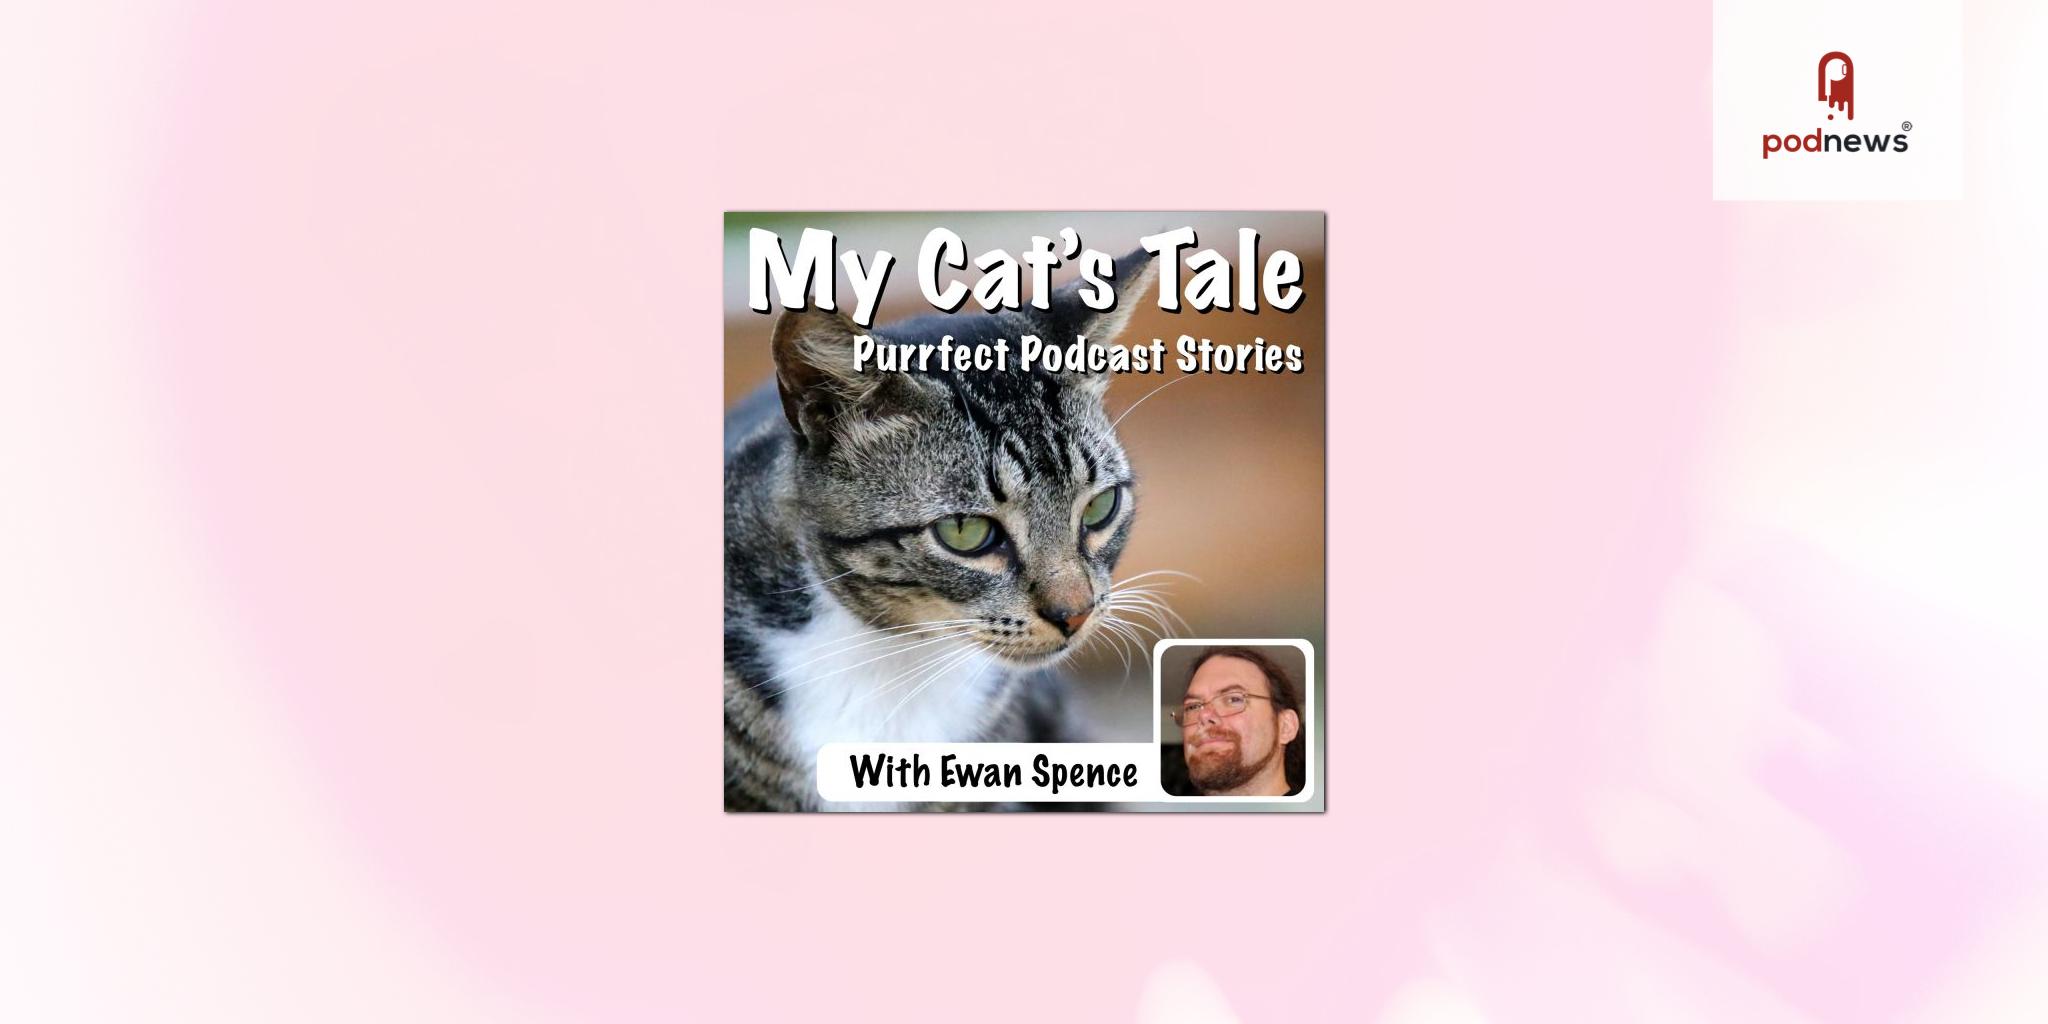 My Cat’s Tale - a purrfect podcast for cats and their owners